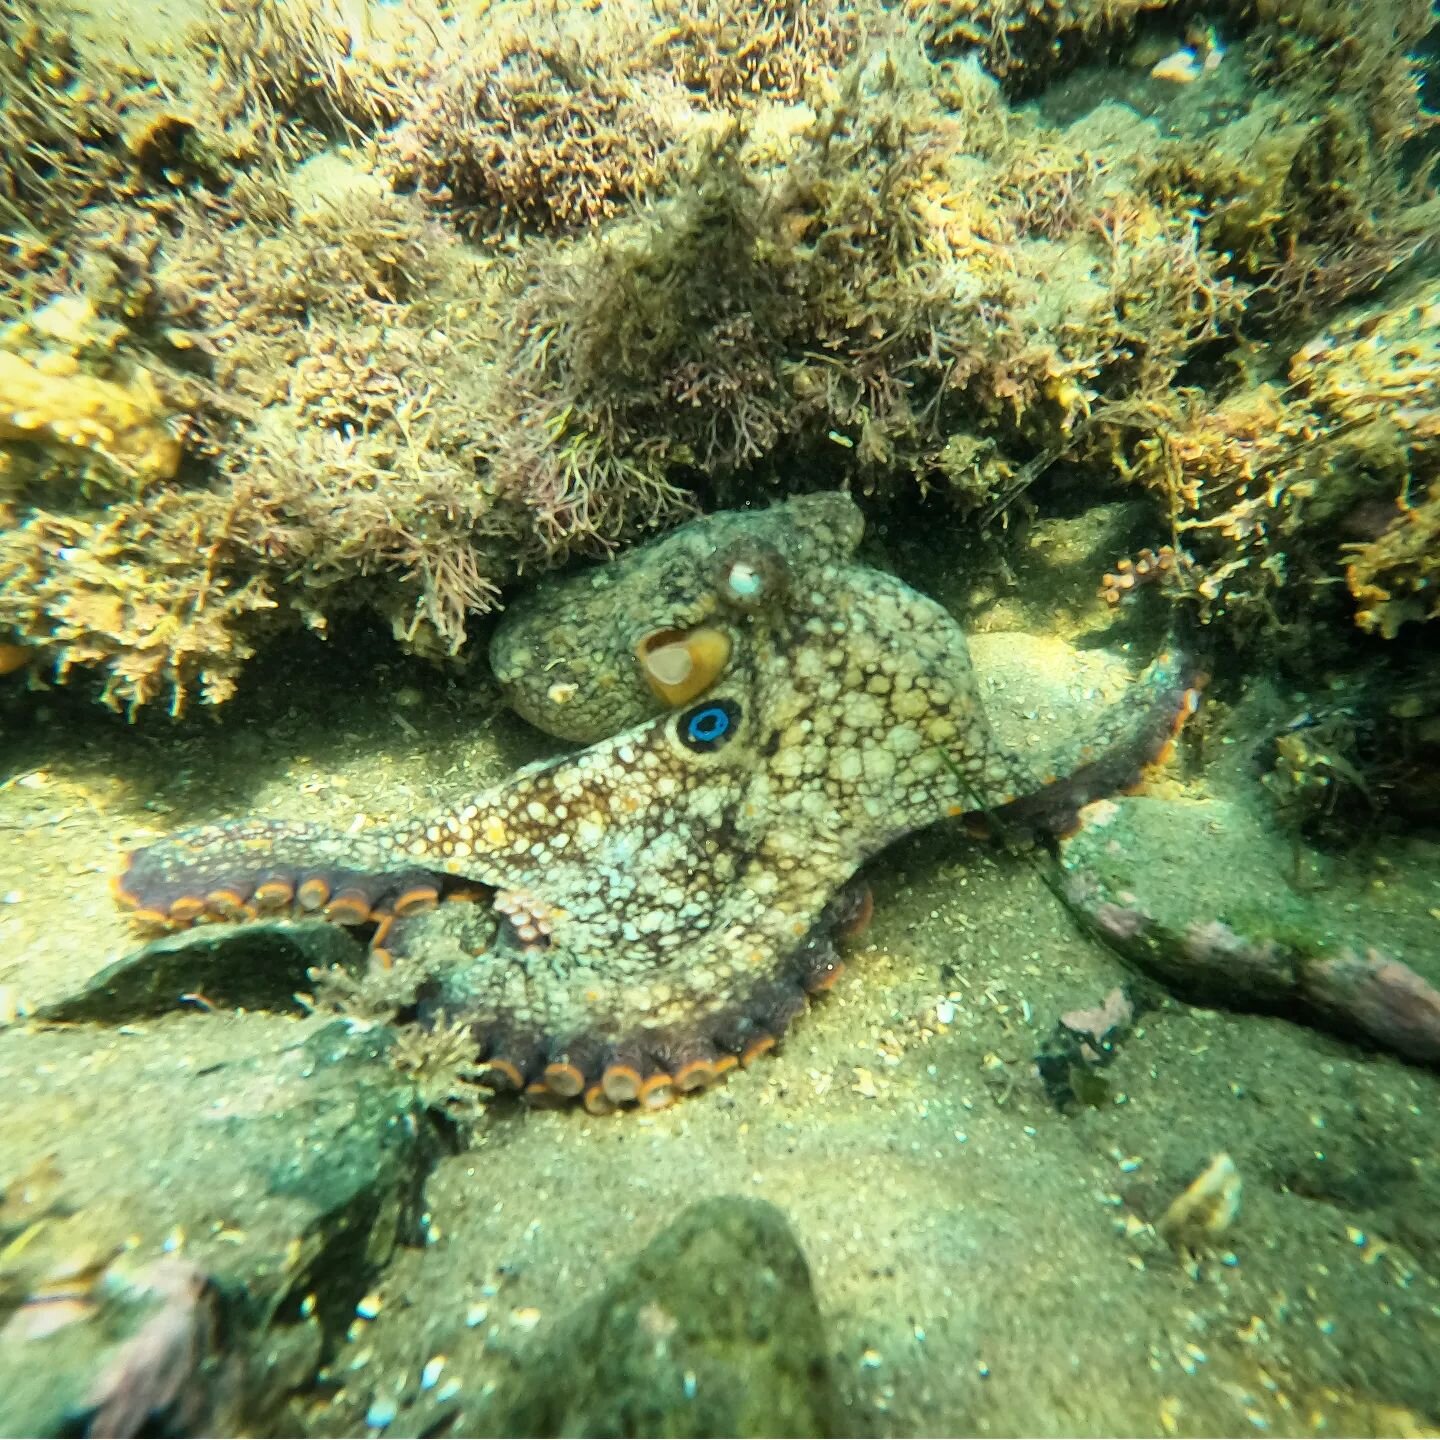 Having a great time in the water with our octopus friends! Come join us for a snorkel!
.
.
.
#snorkel #sandiego #california #octopus #twospot #invertebrate #nature #travel #animals #adventure #marinebiology